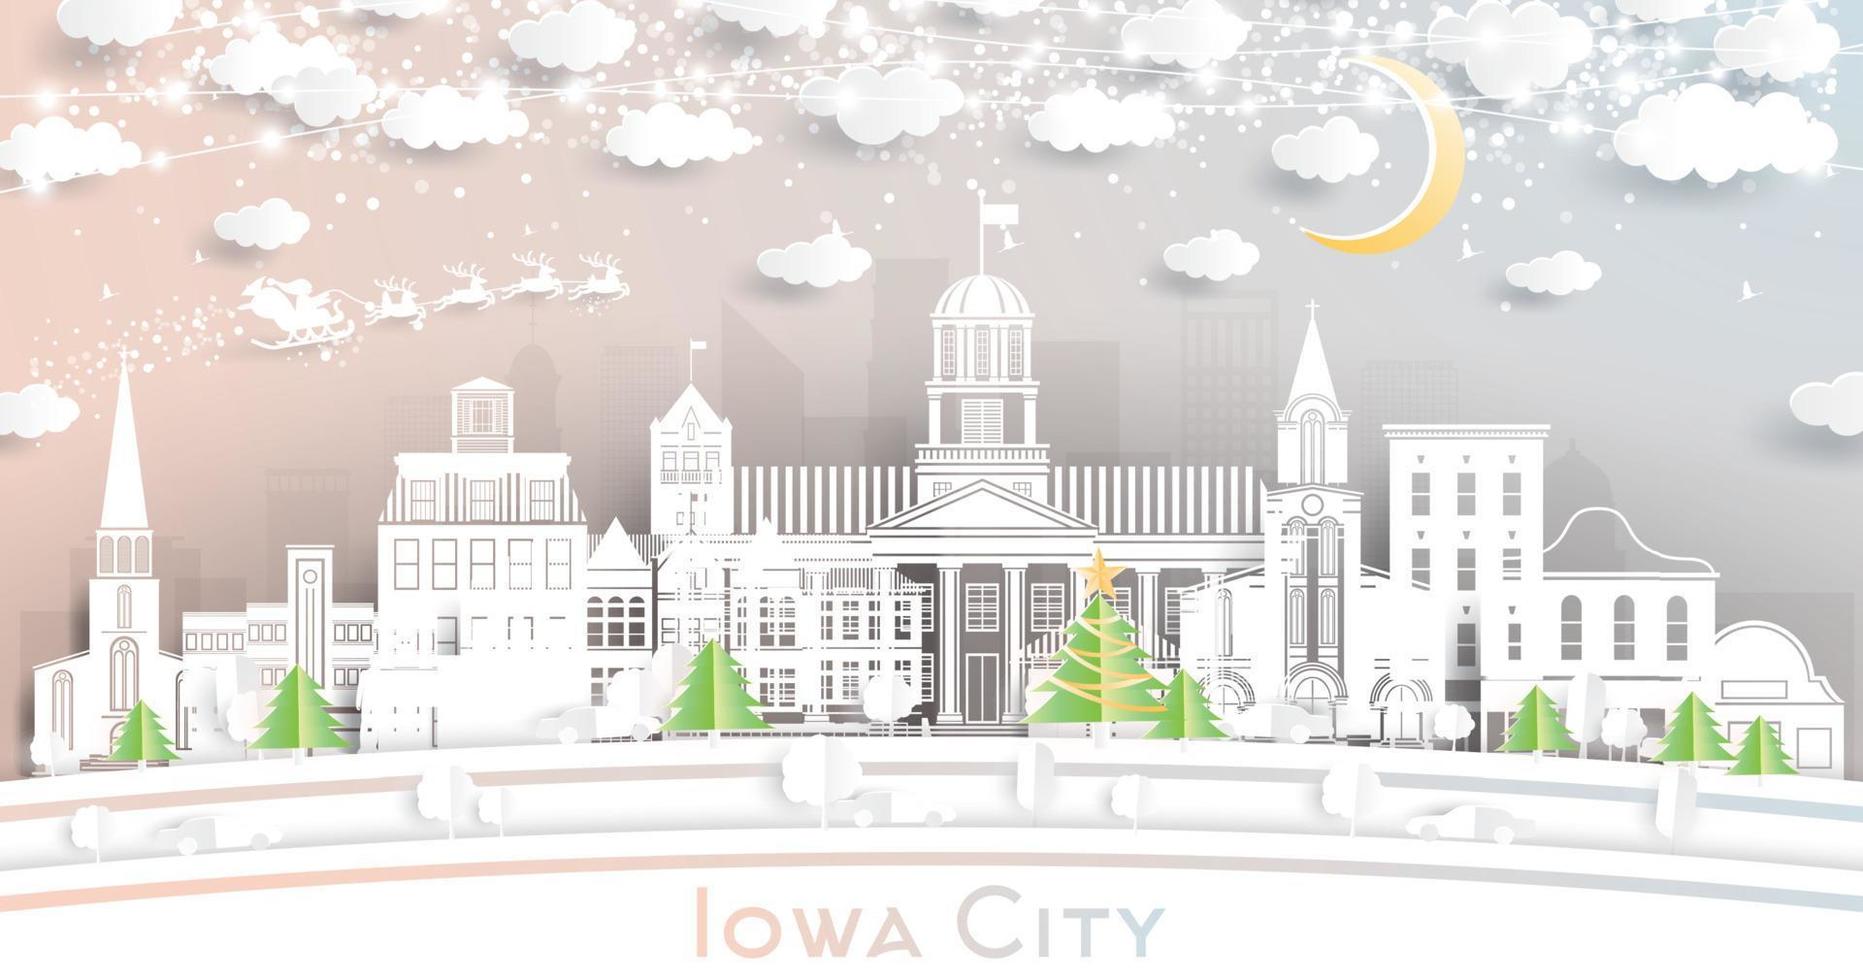 Iowa City Skyline in Paper Cut Style with Snowflakes, Moon and Neon Garland. vector